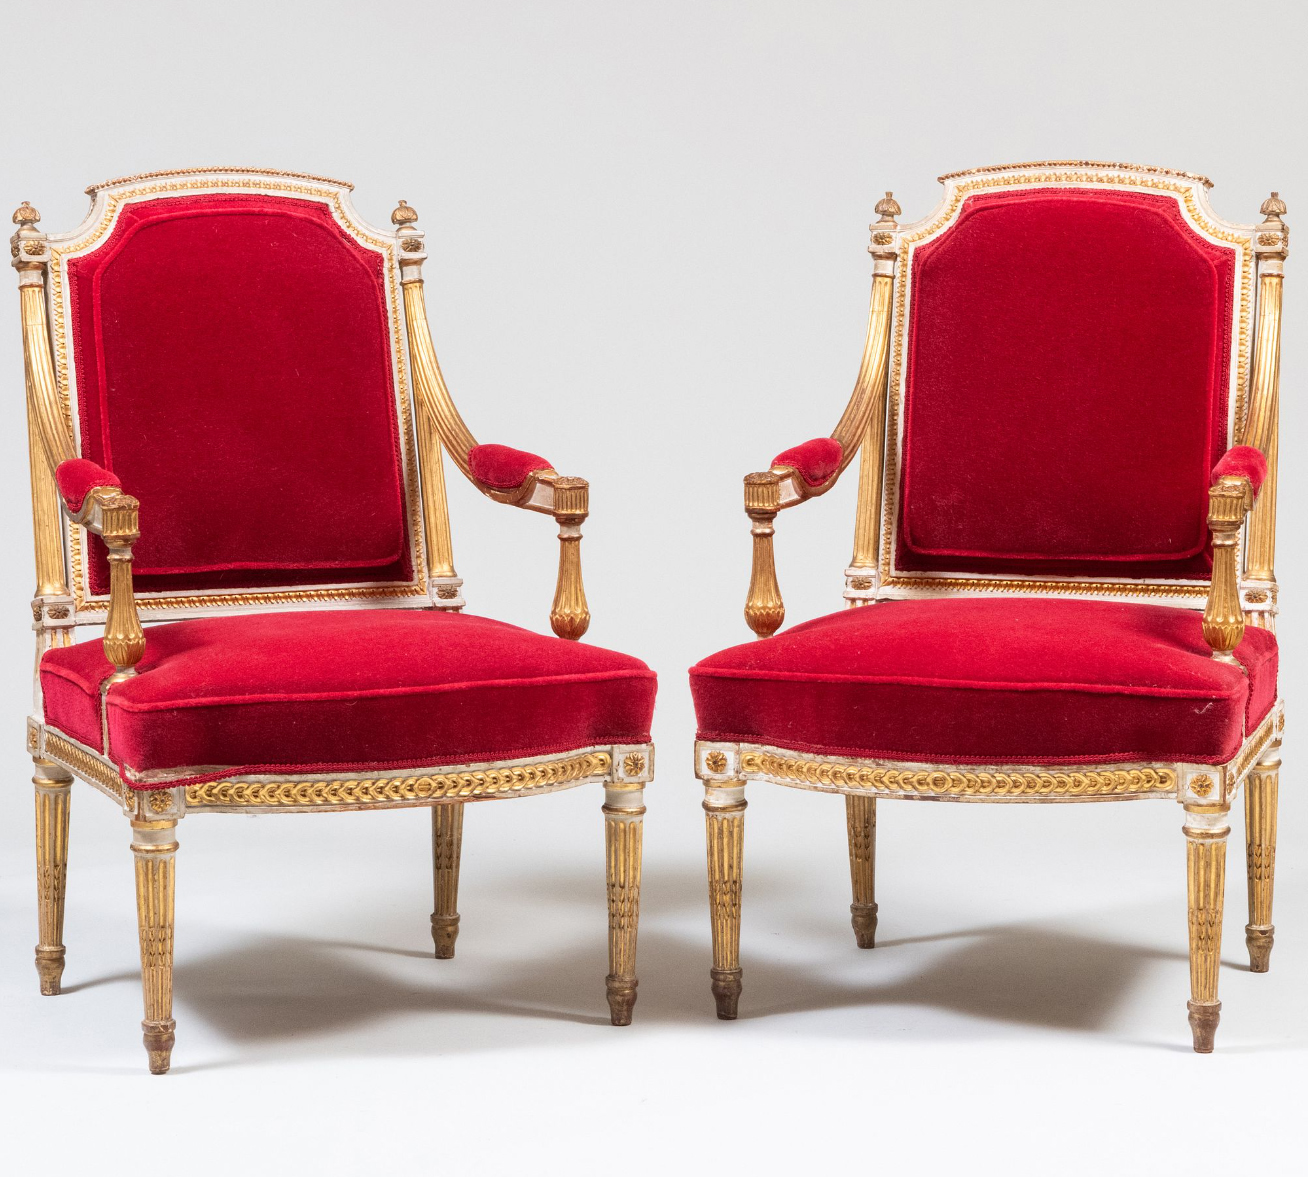 Pair of Louis XVI, Ormolu-Mounted, Carved, Painted and Parcel-Gilt, Velvet Upholstered Fauteuils  la Reine